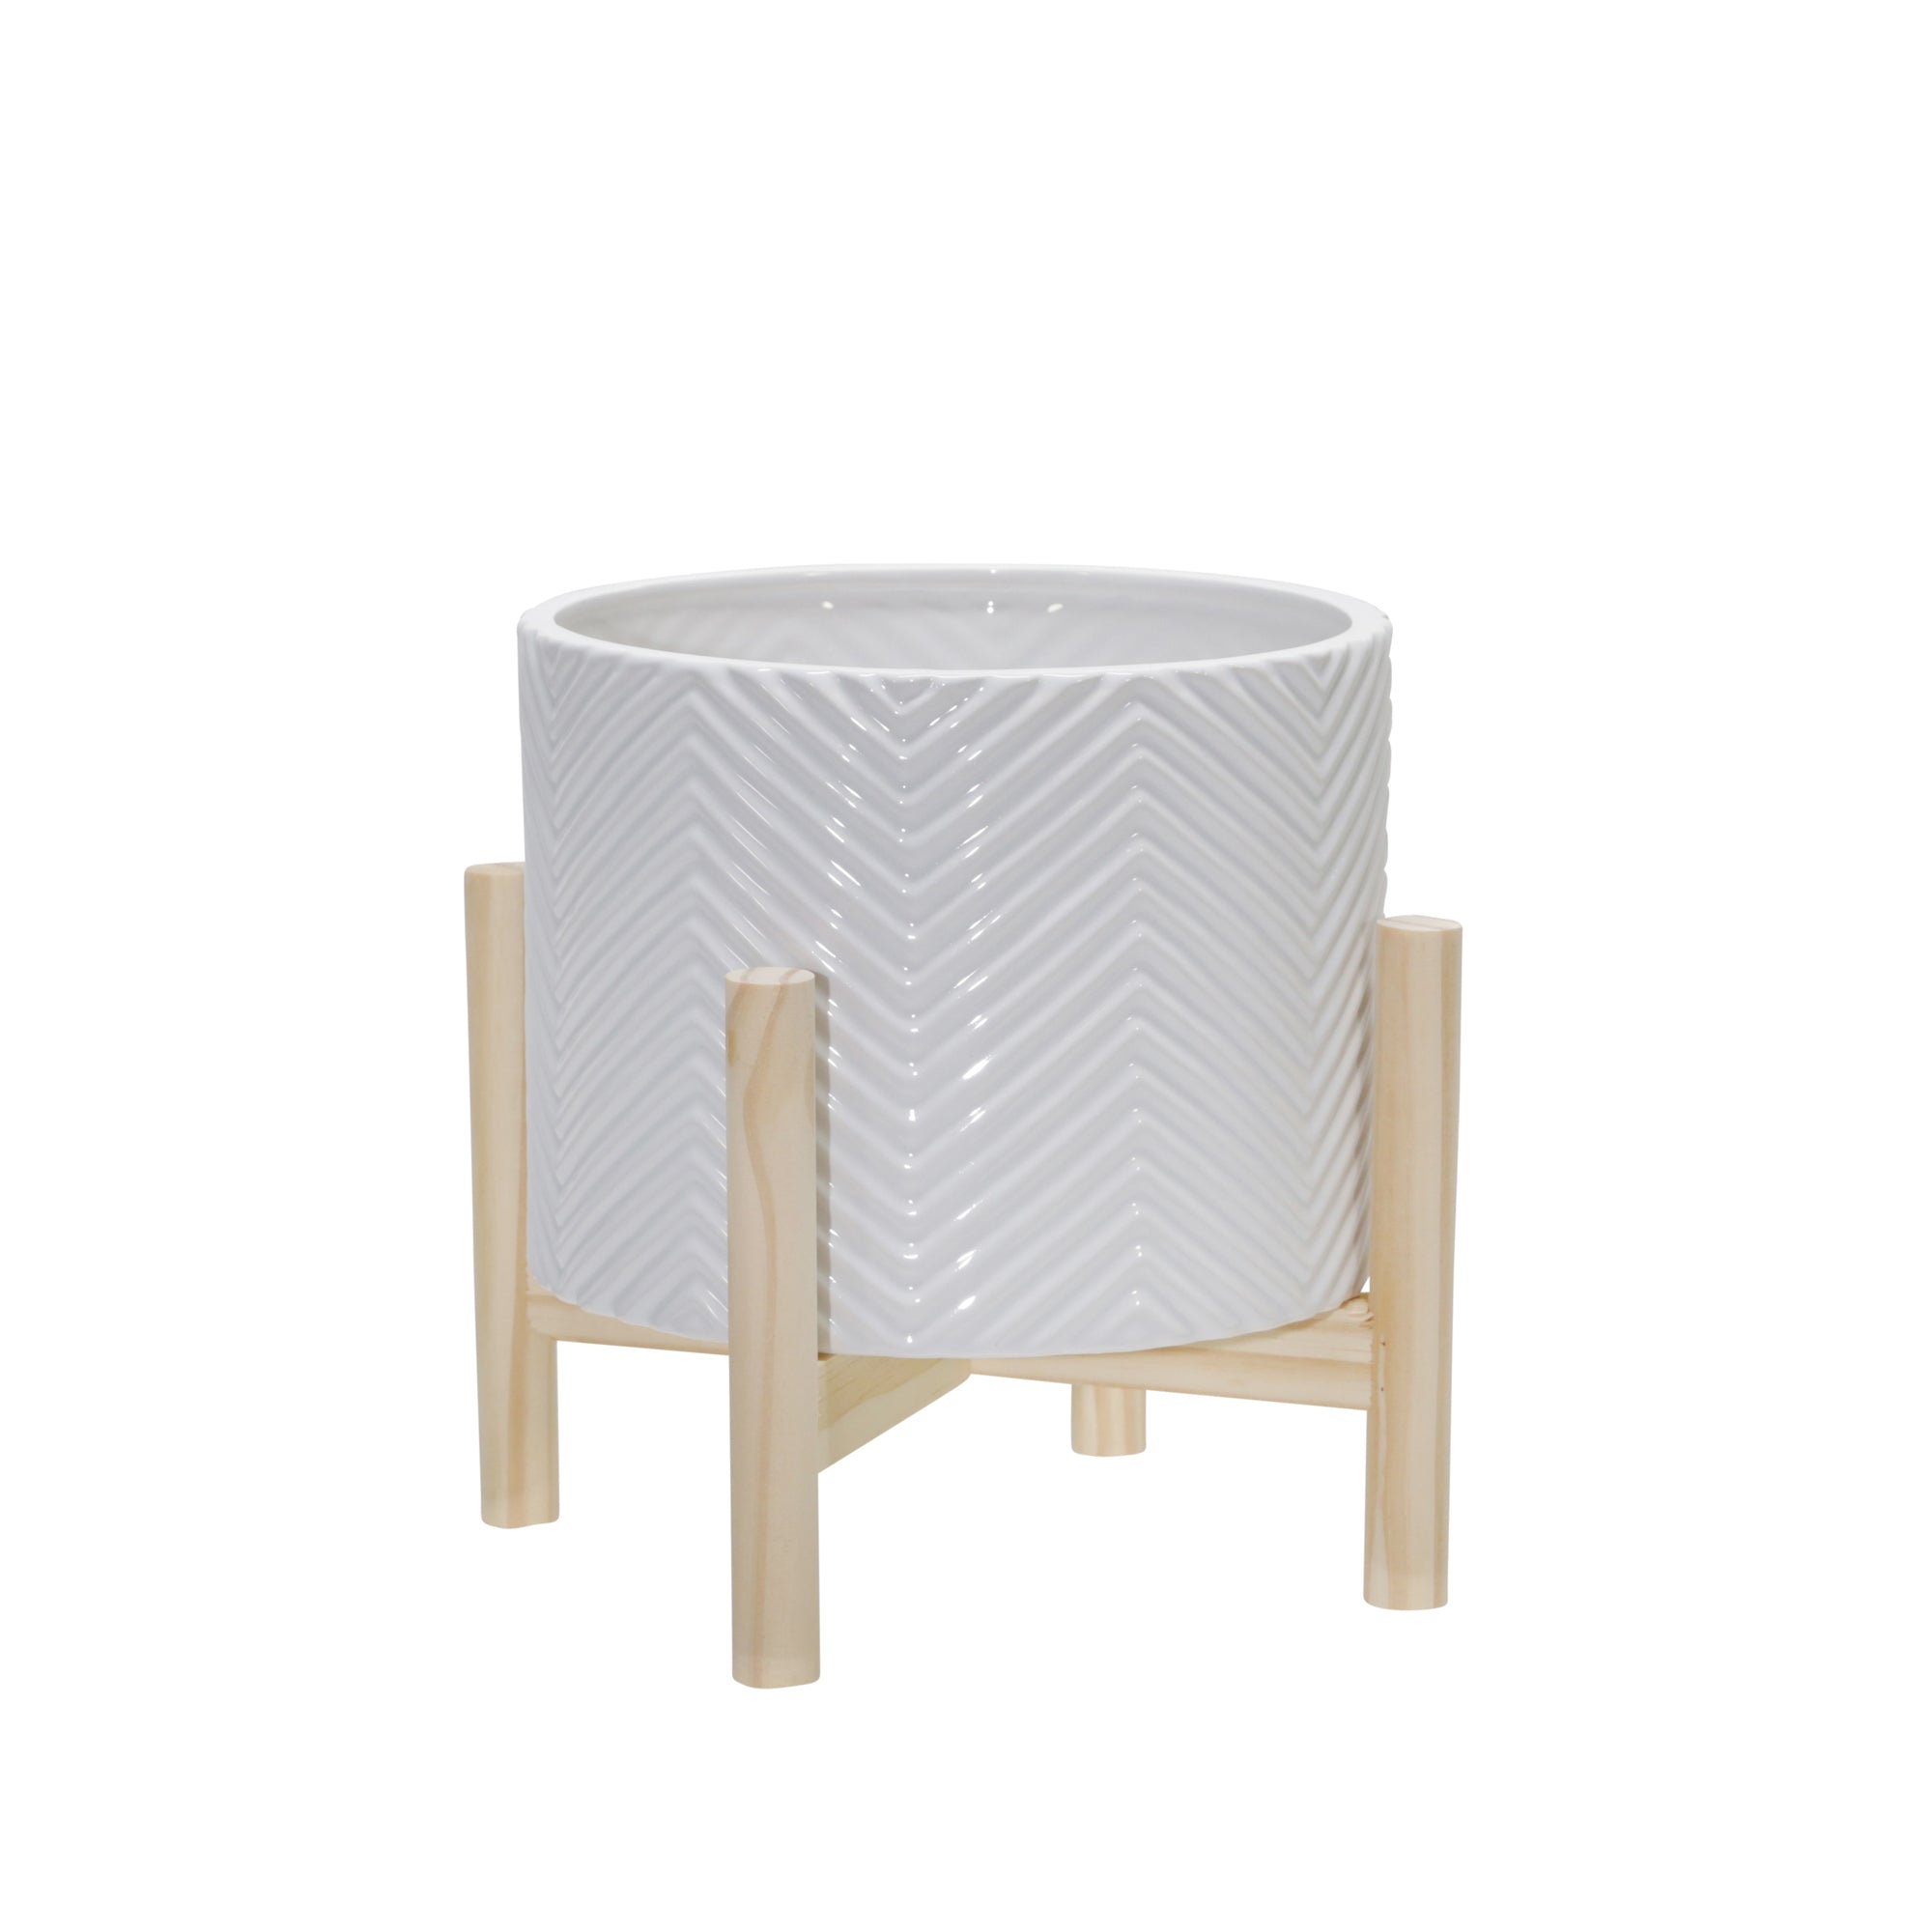 8" Chevron Planter with Wood Stand, White, Planters